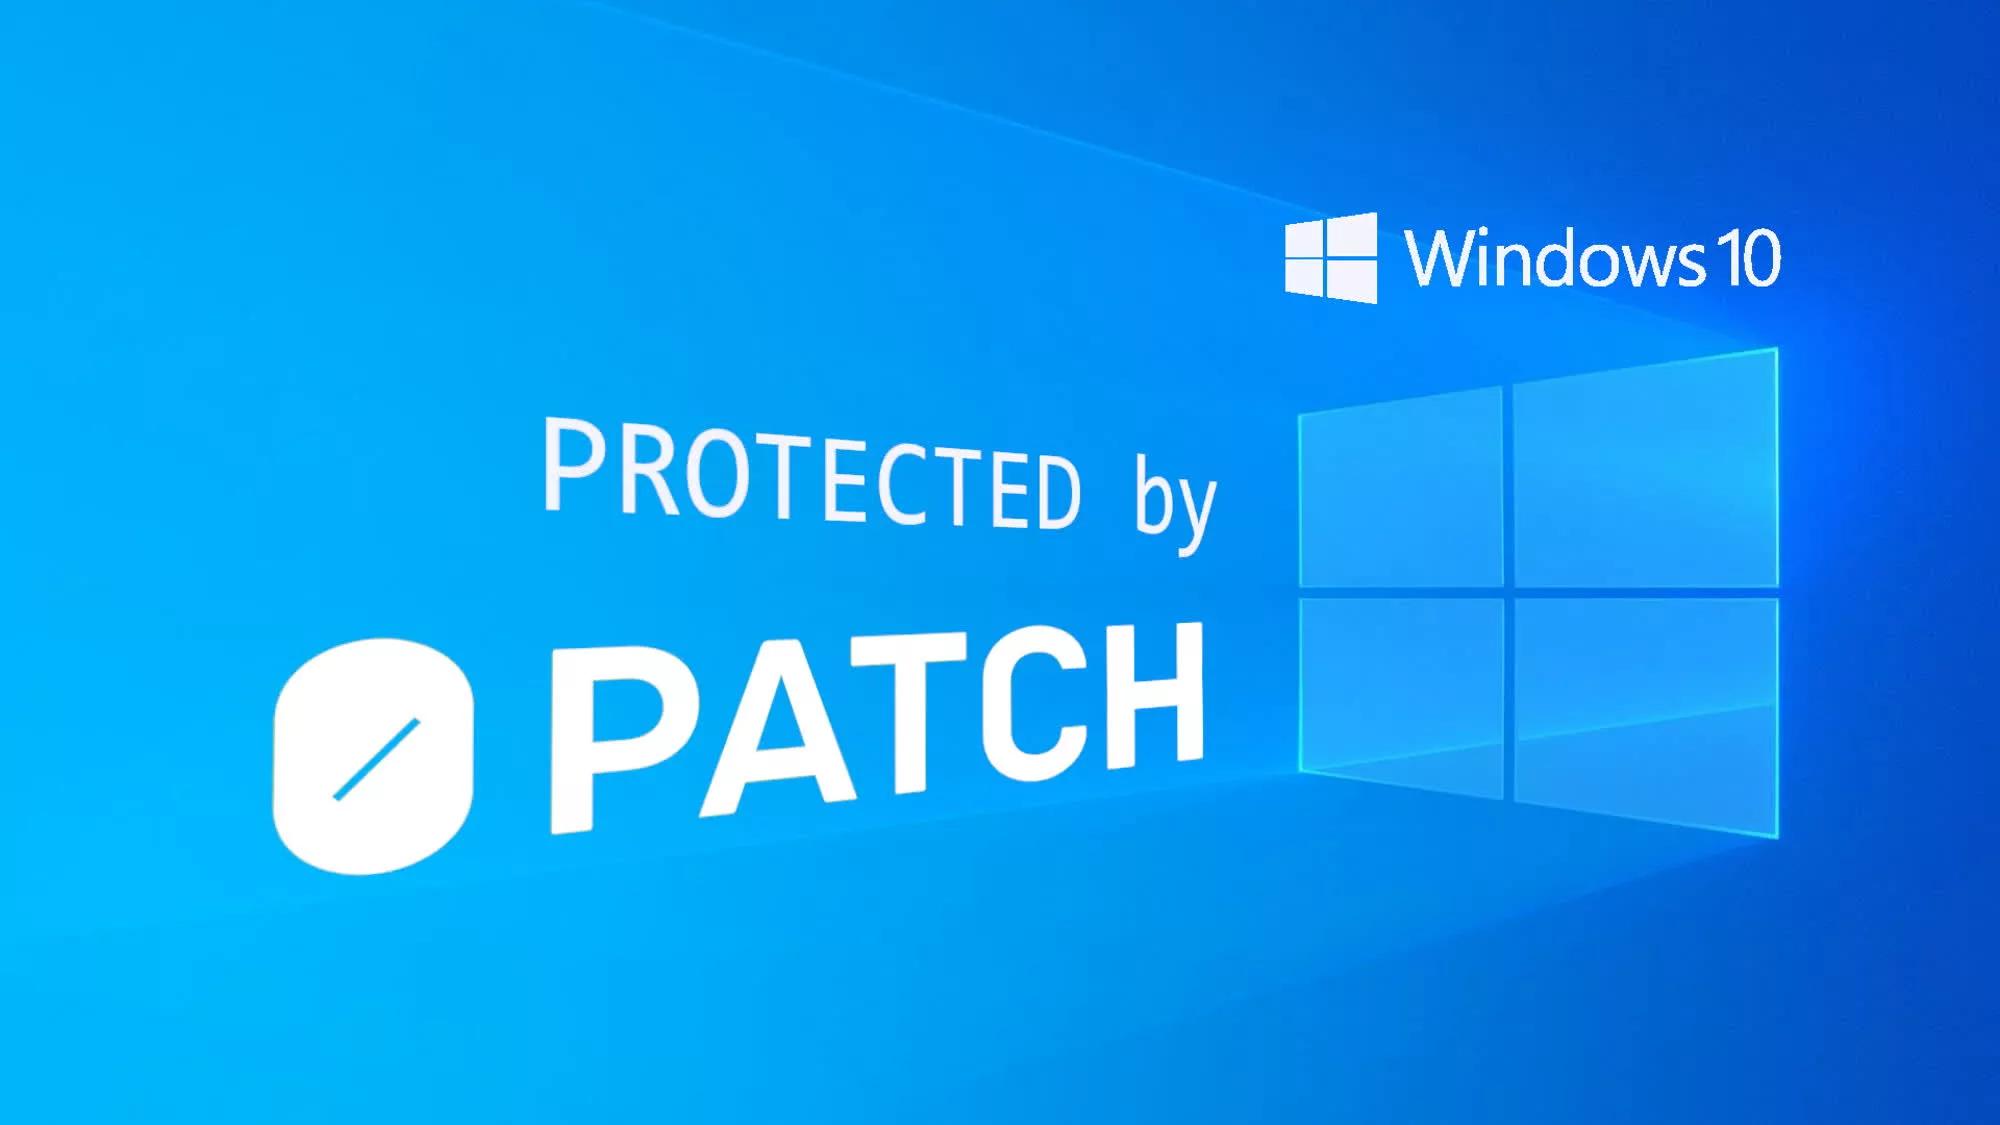 Windows 10 will get five extra years of support courtesy of 0patch [Video]